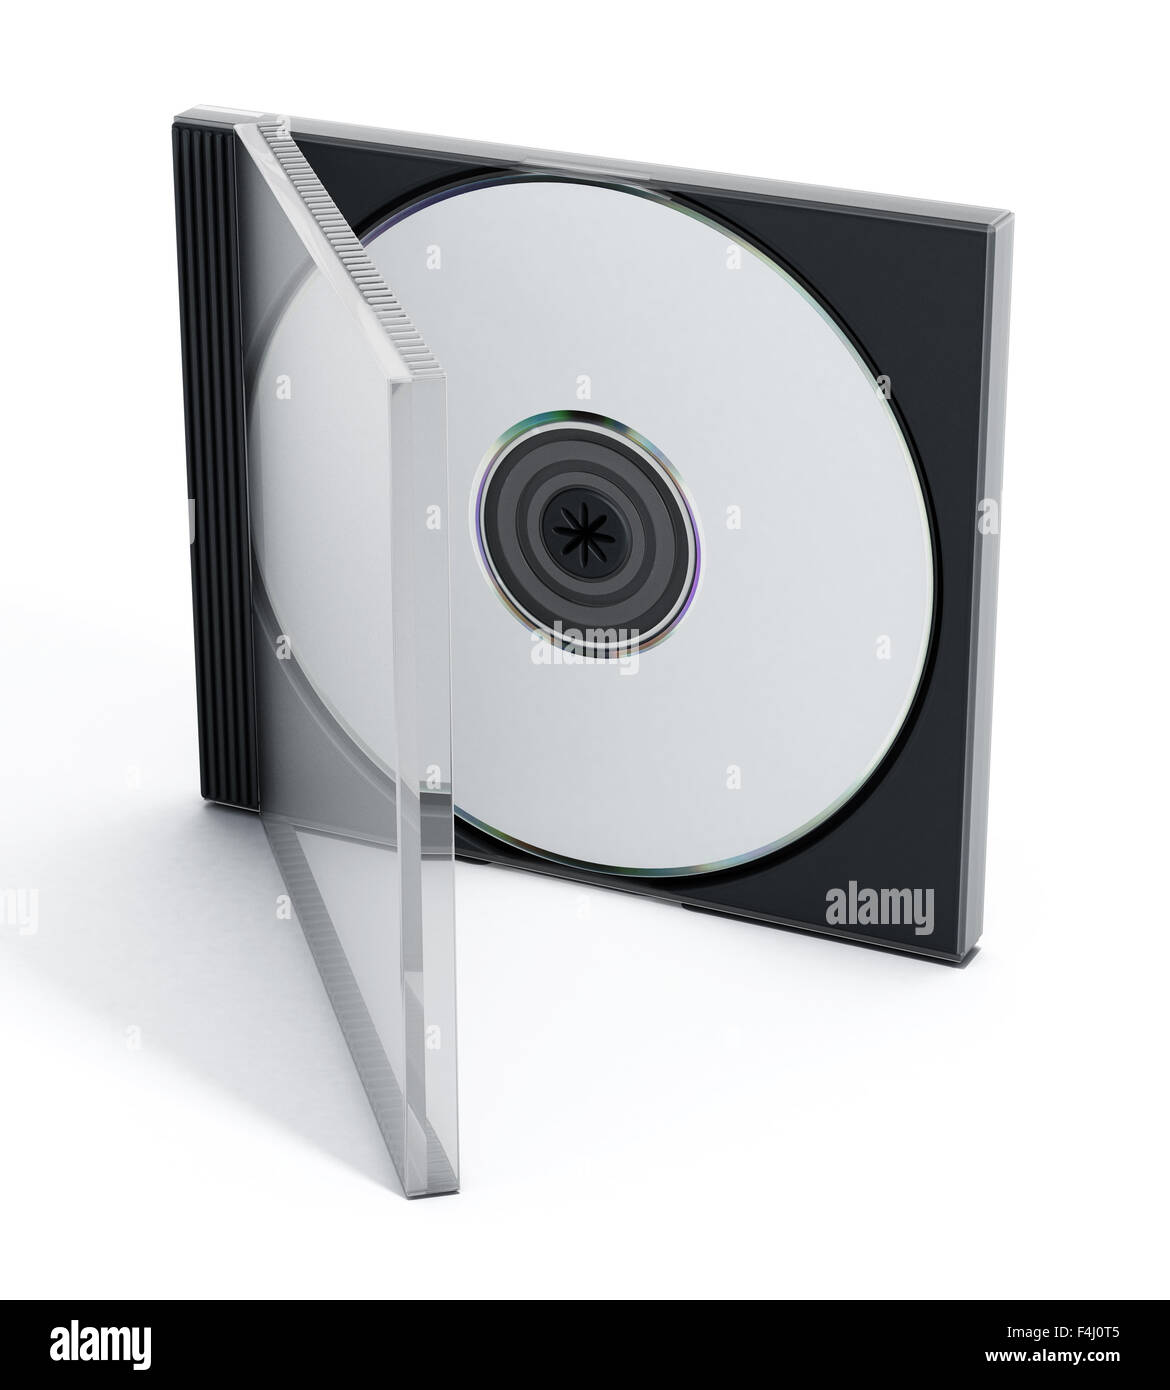 Cds Dvds Isolated Stock Photo 62613808